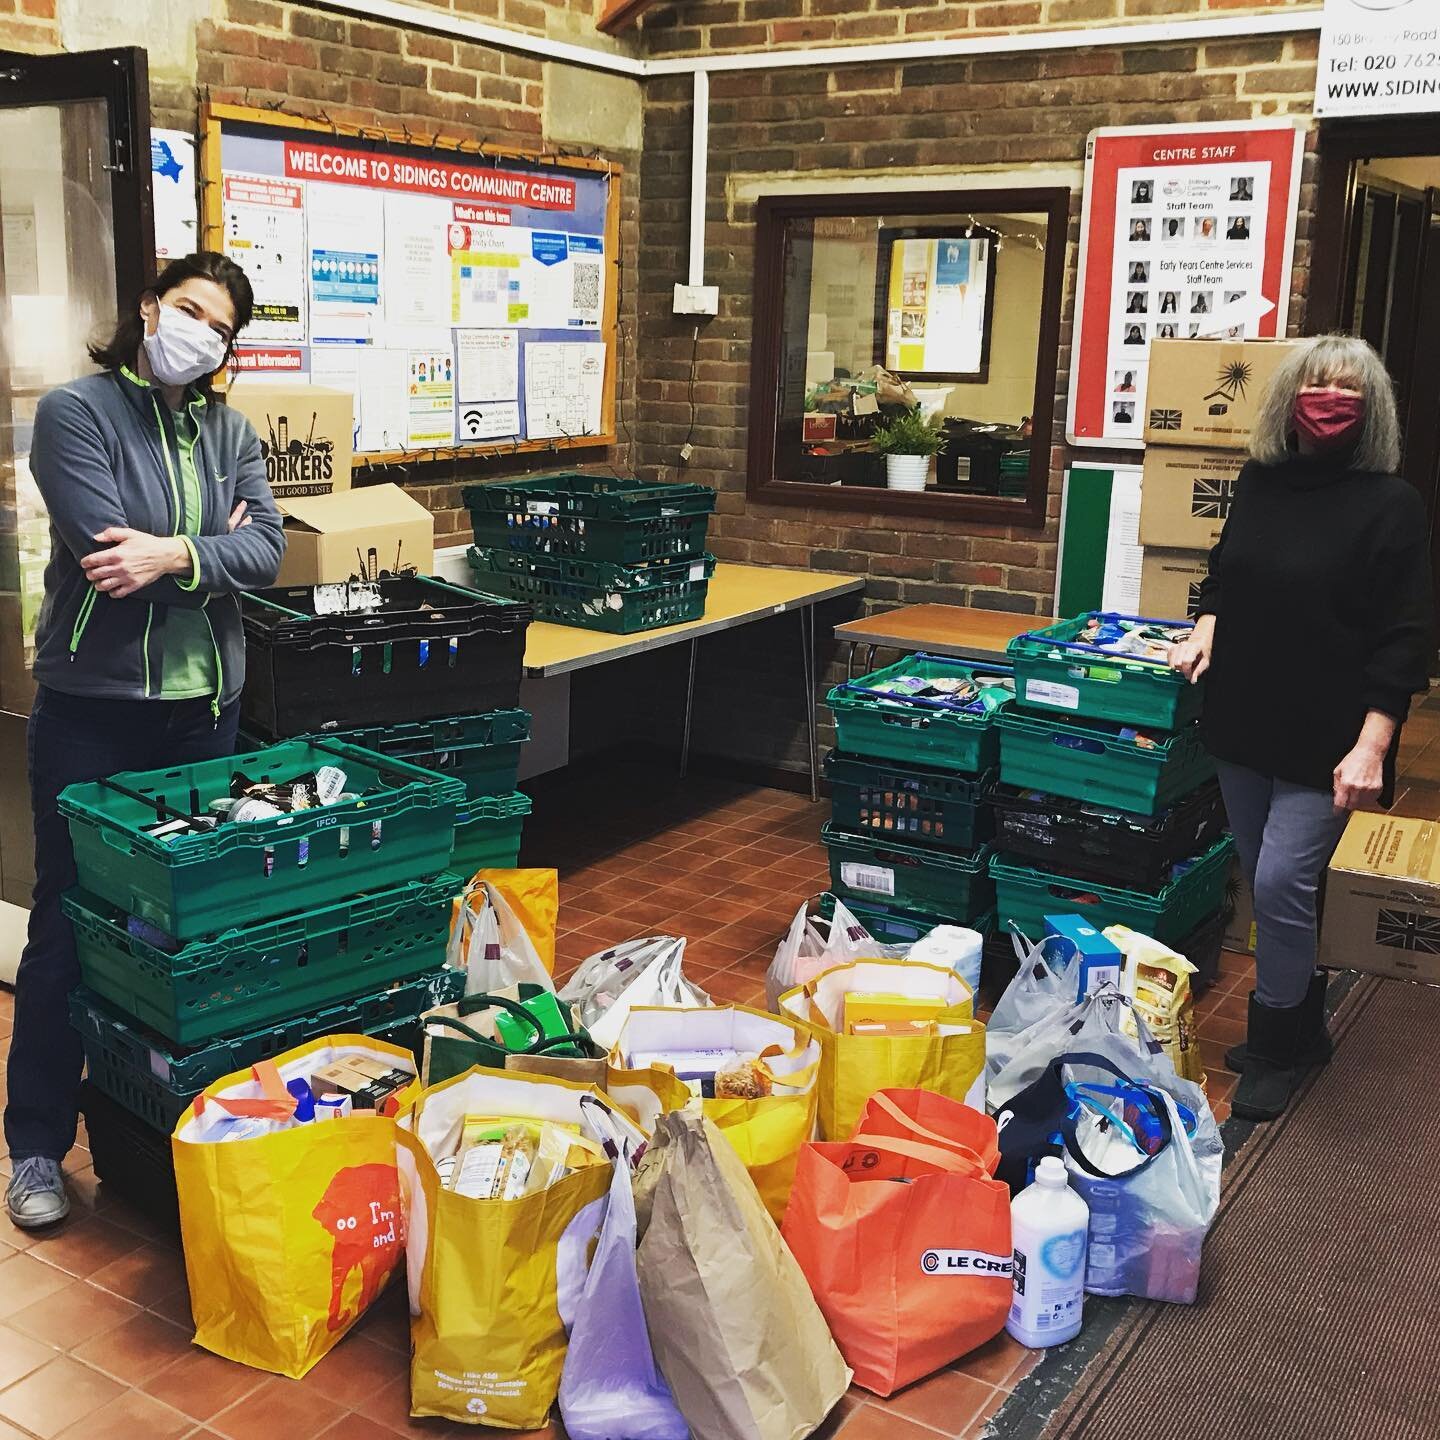 Thank you @nbhschool  for your generous donation today! We&rsquo;re so grateful 💚 especially for all the extra toiletries and household goods - they&rsquo;re so helpful for those who are self isolating! And it was lovely to restock our shelves with 